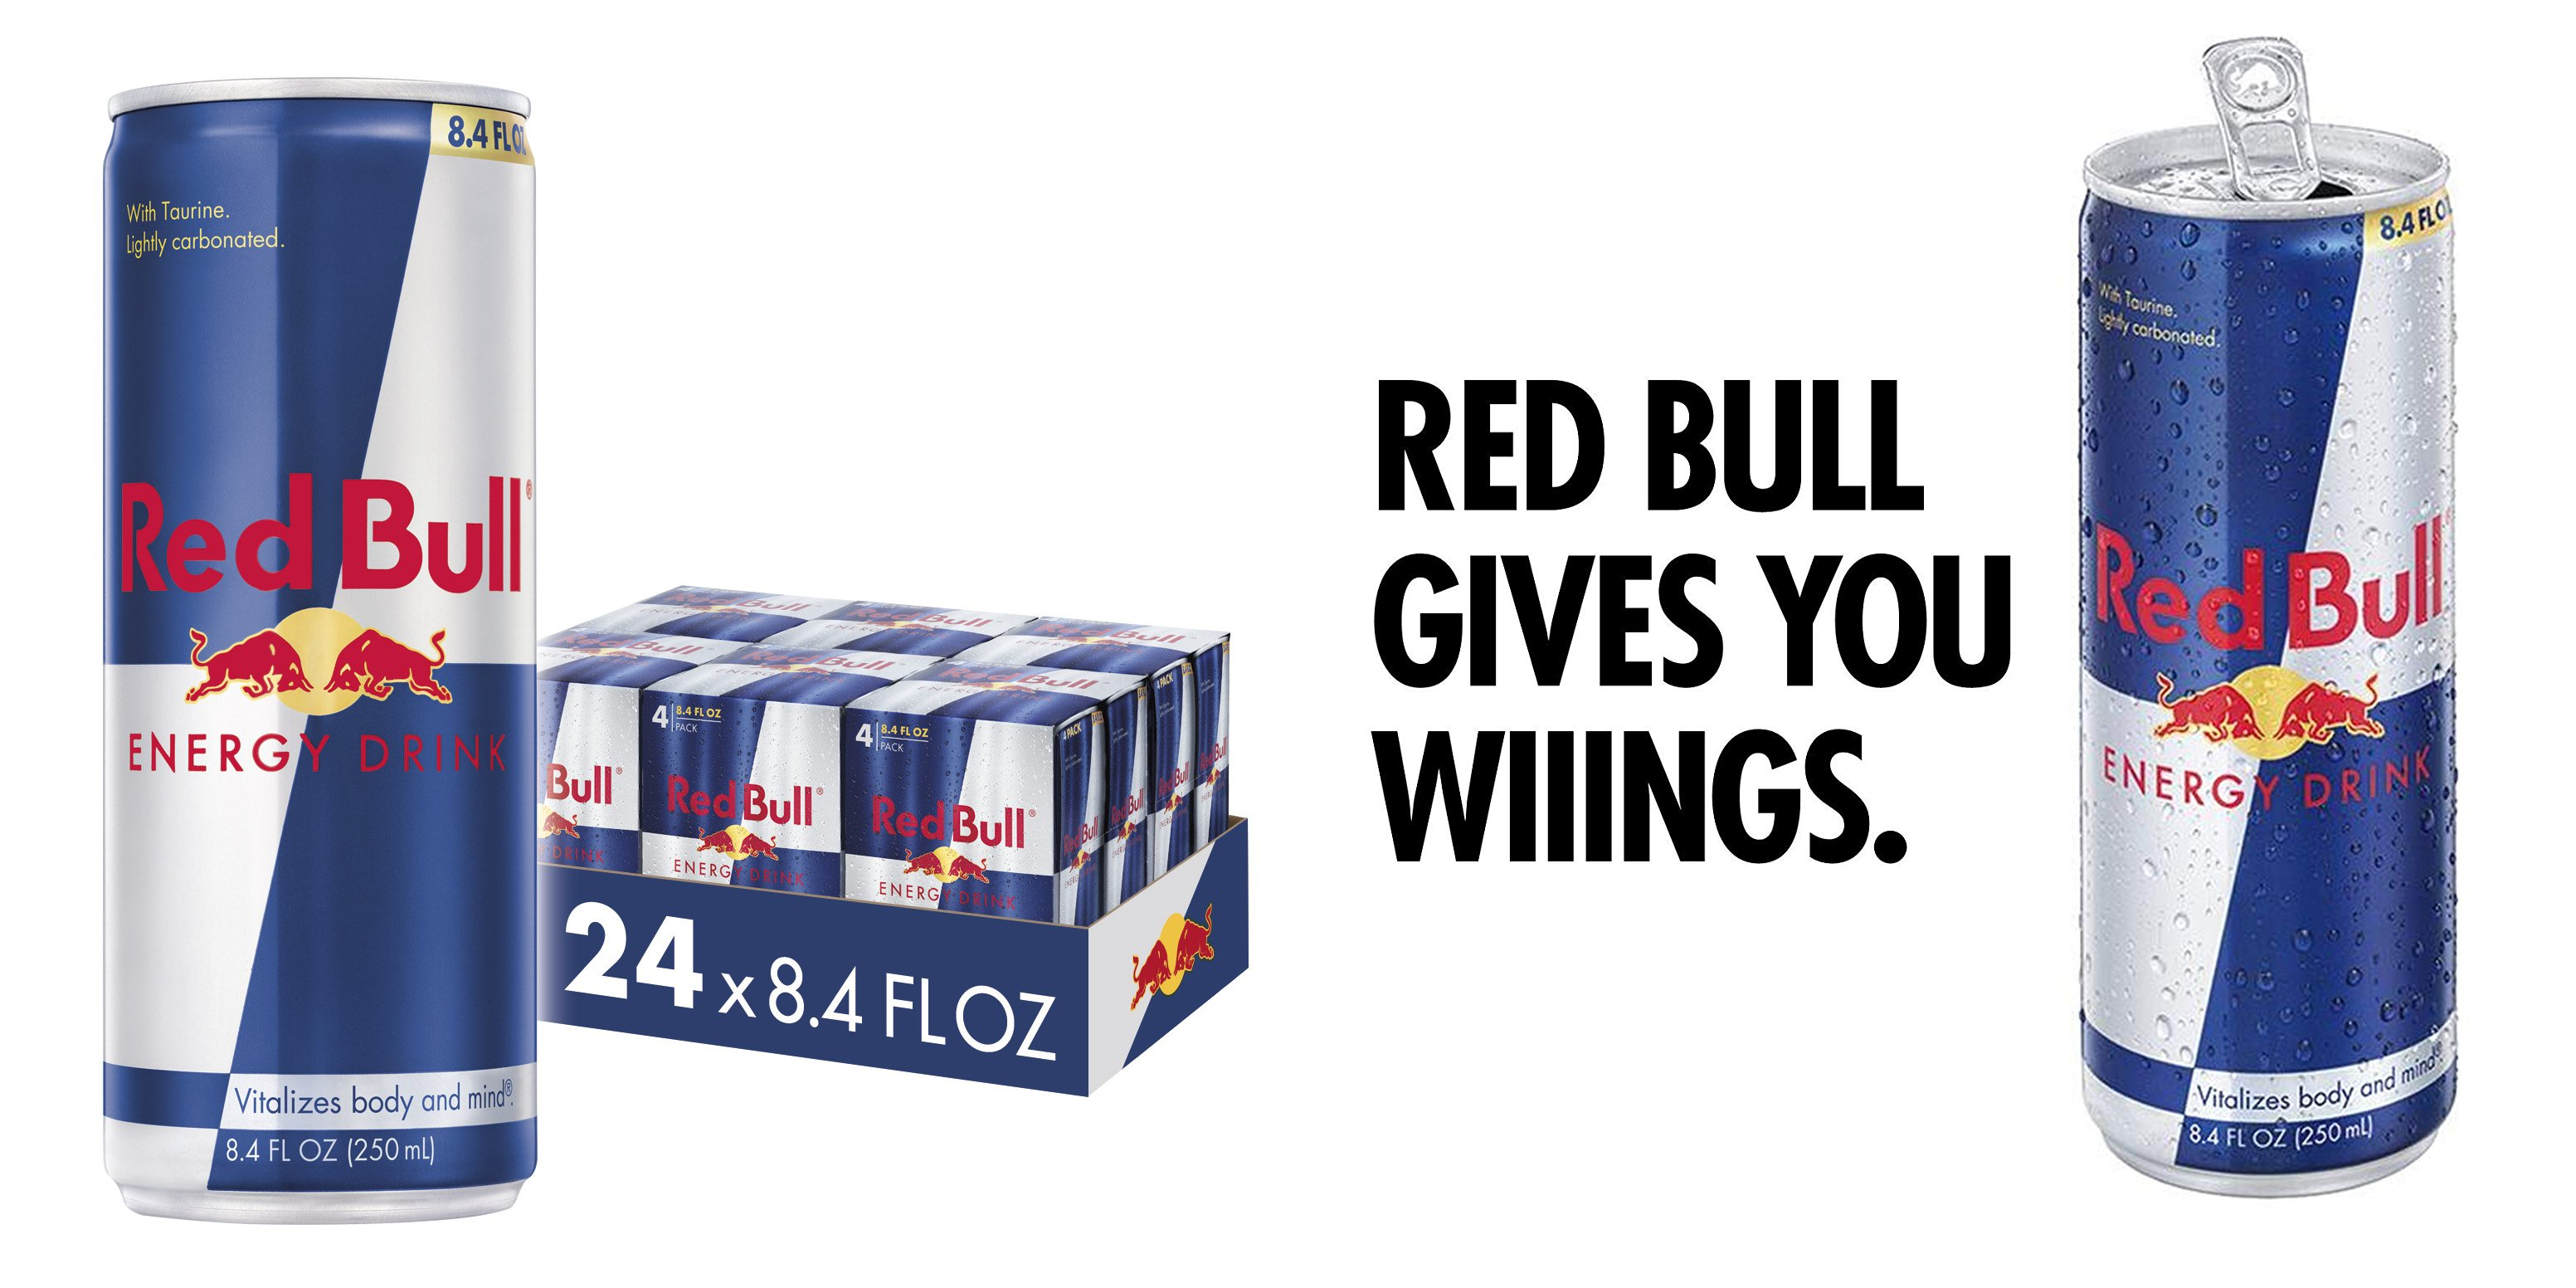 gives you wings, gives you 24 cans' worth at $1 apiece